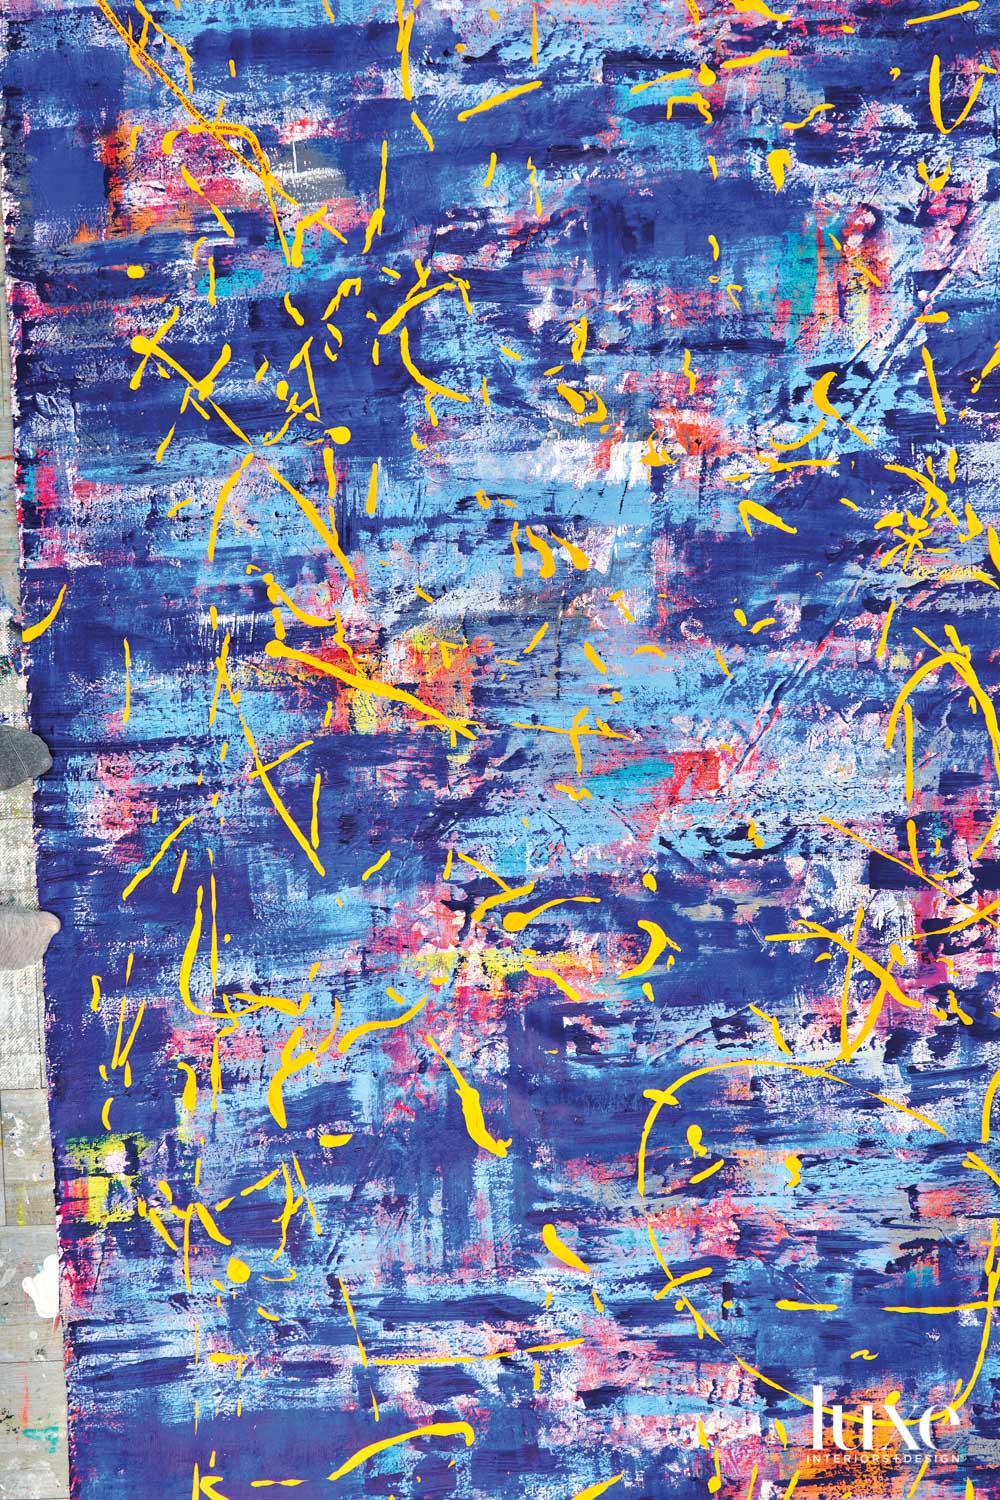 close-up of aidan marak work feature purples, blues and yellow